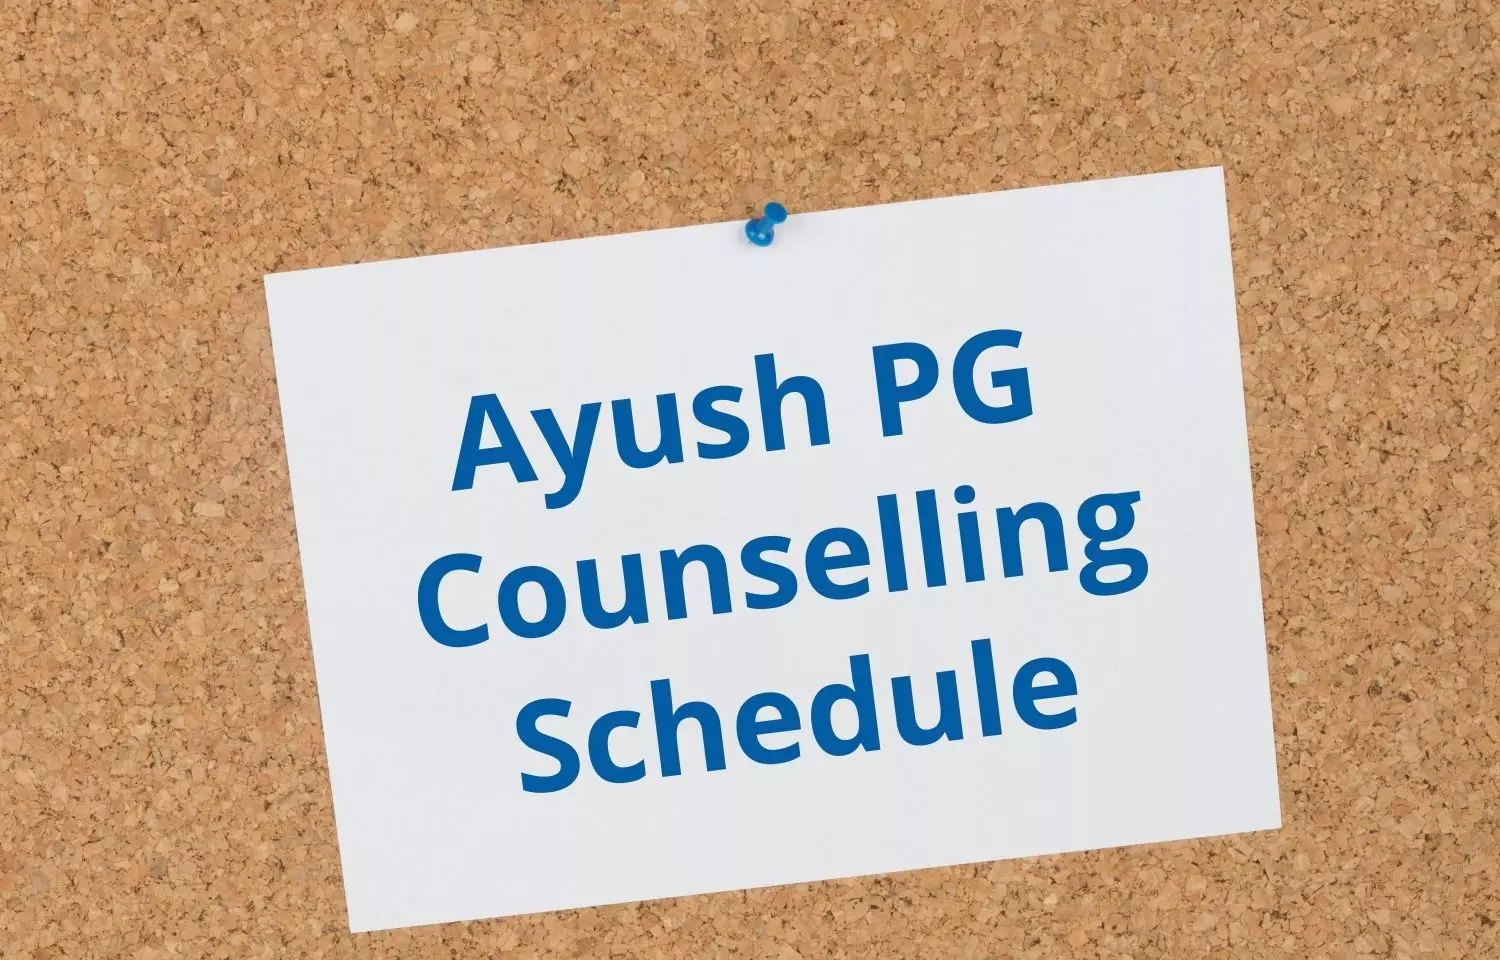 PG AYUSH Admissions 2021: Maha CET Cell releases schedule, eligibility criteria for Institutional Level round